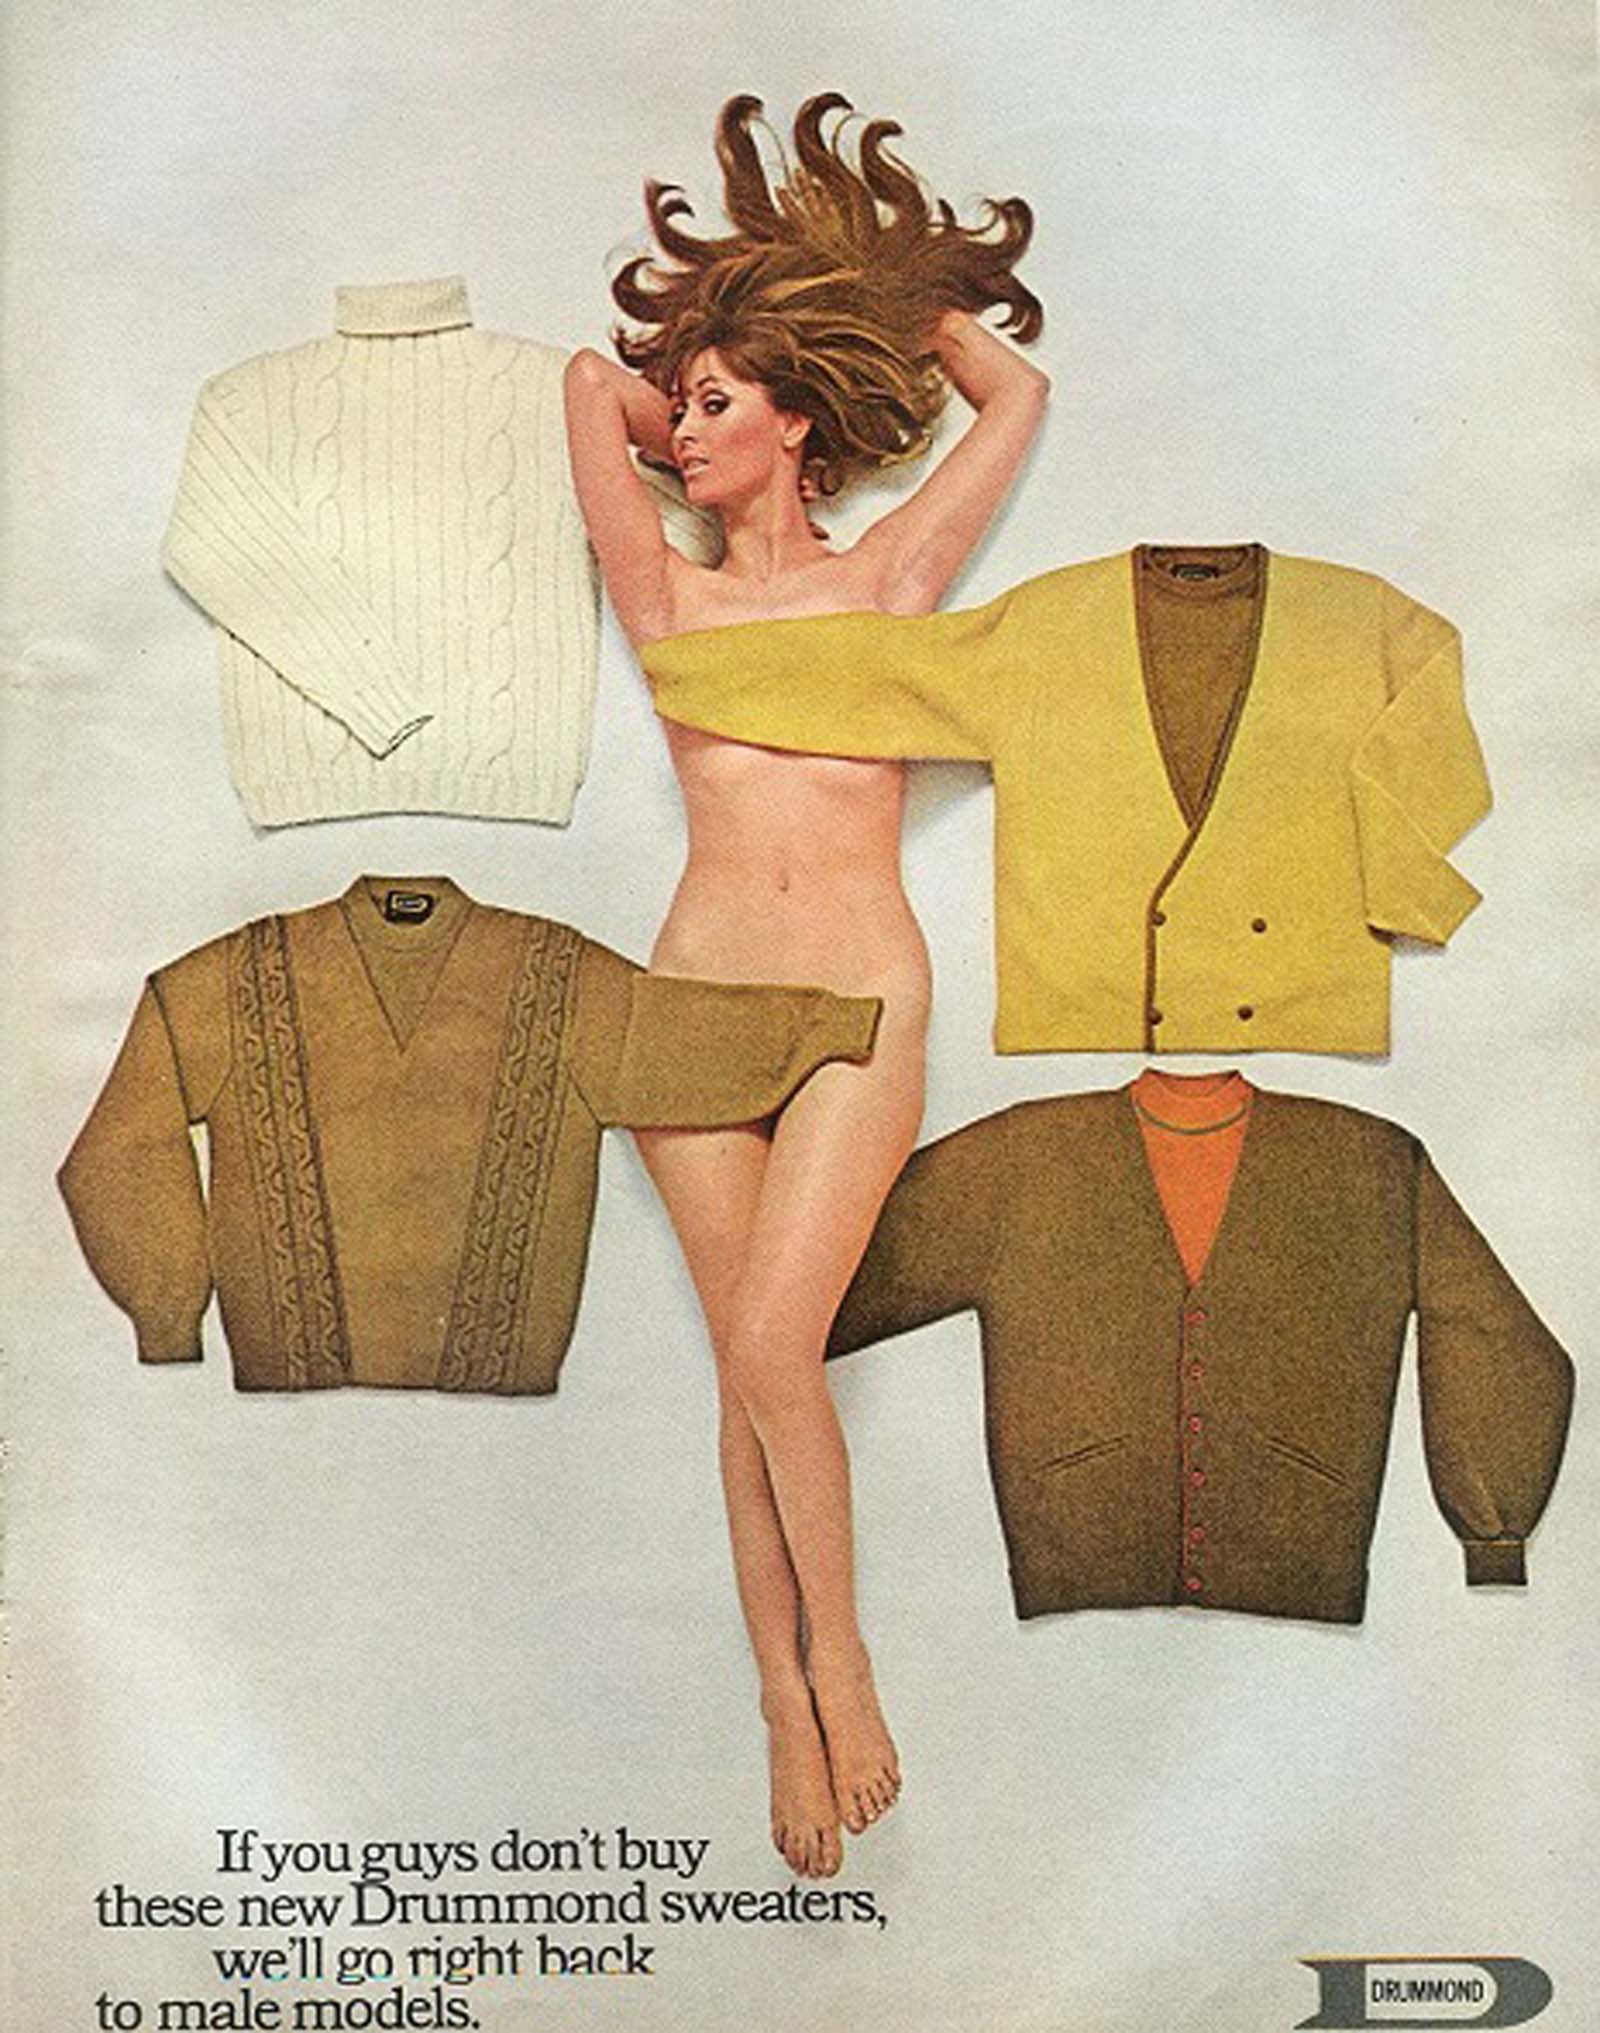 An ad for Drummond sweaters.